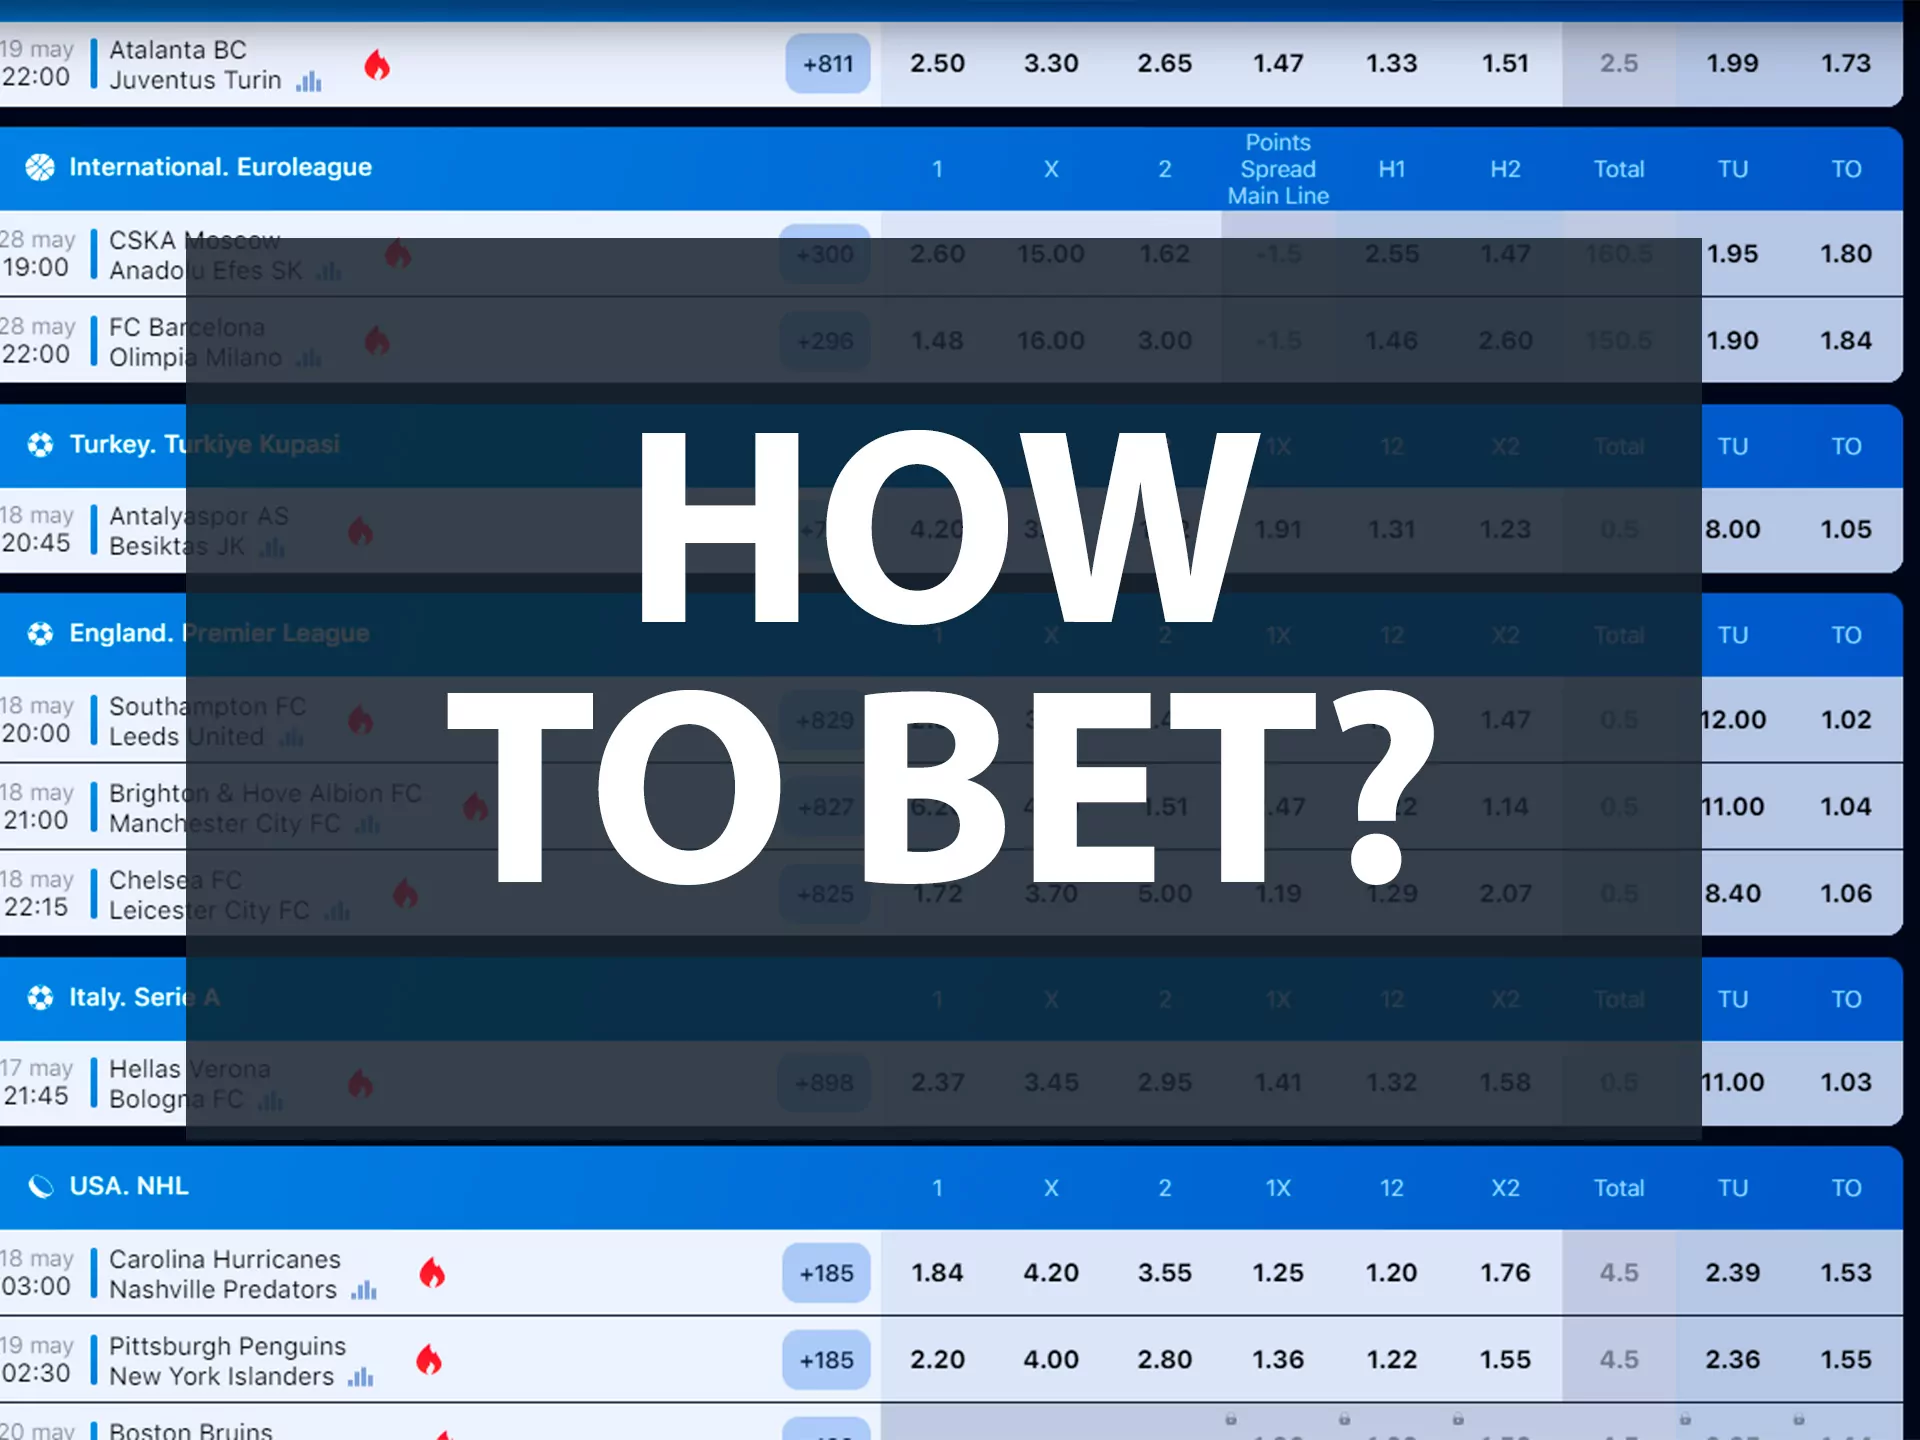 Make a deposit and place bets on your favorite sport or team.